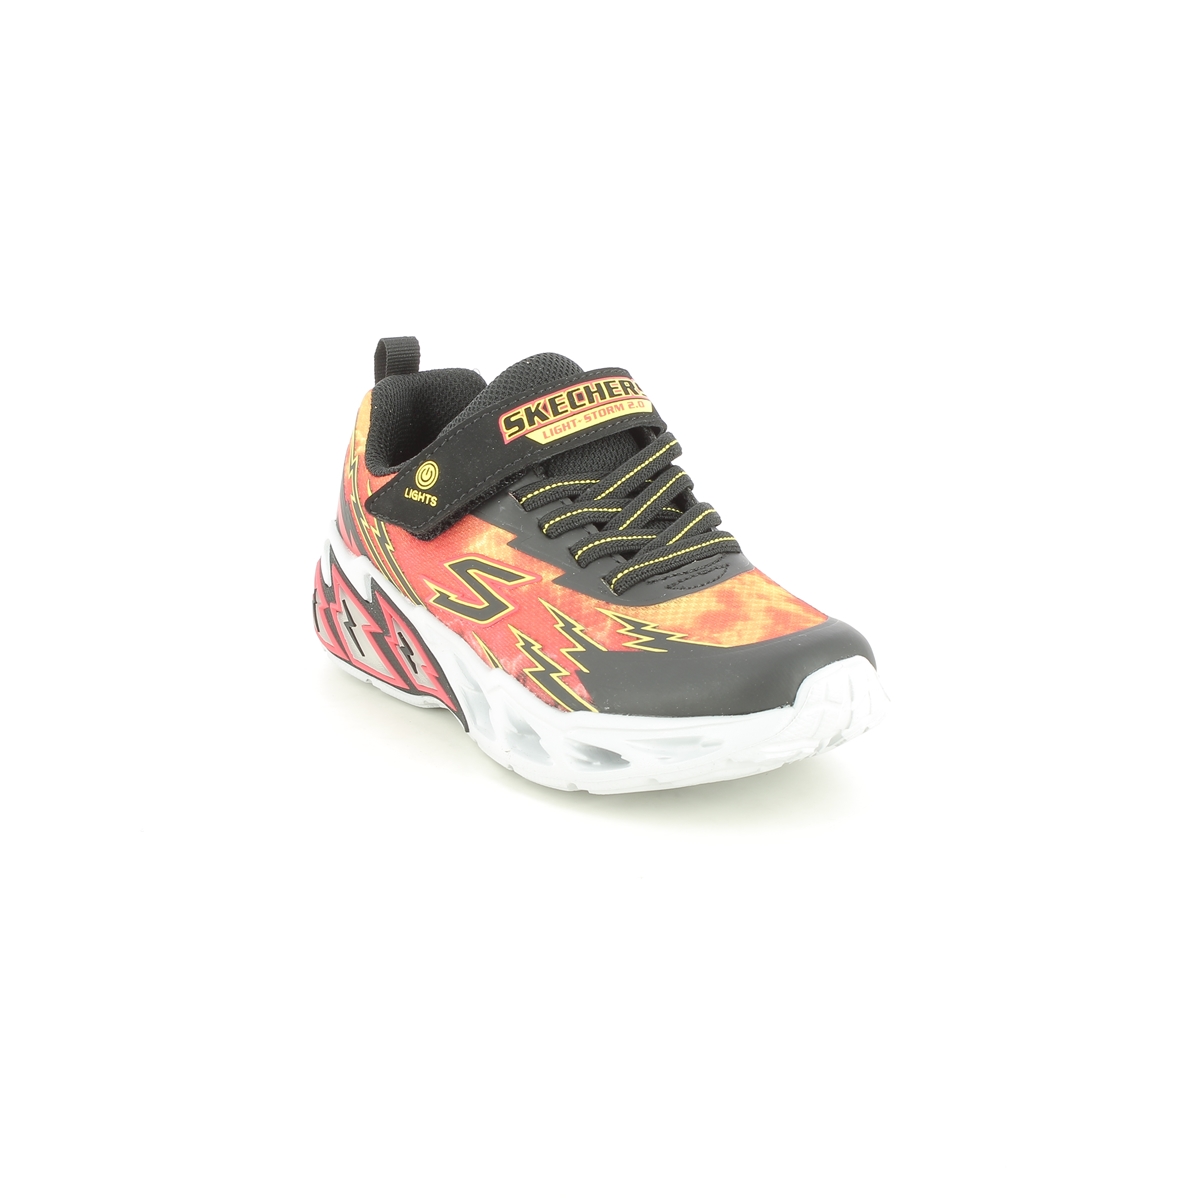 Skechers Light Storm 2.0 Black Red Kids Trainers 400150L In Size 30 In Plain Black Red For kids